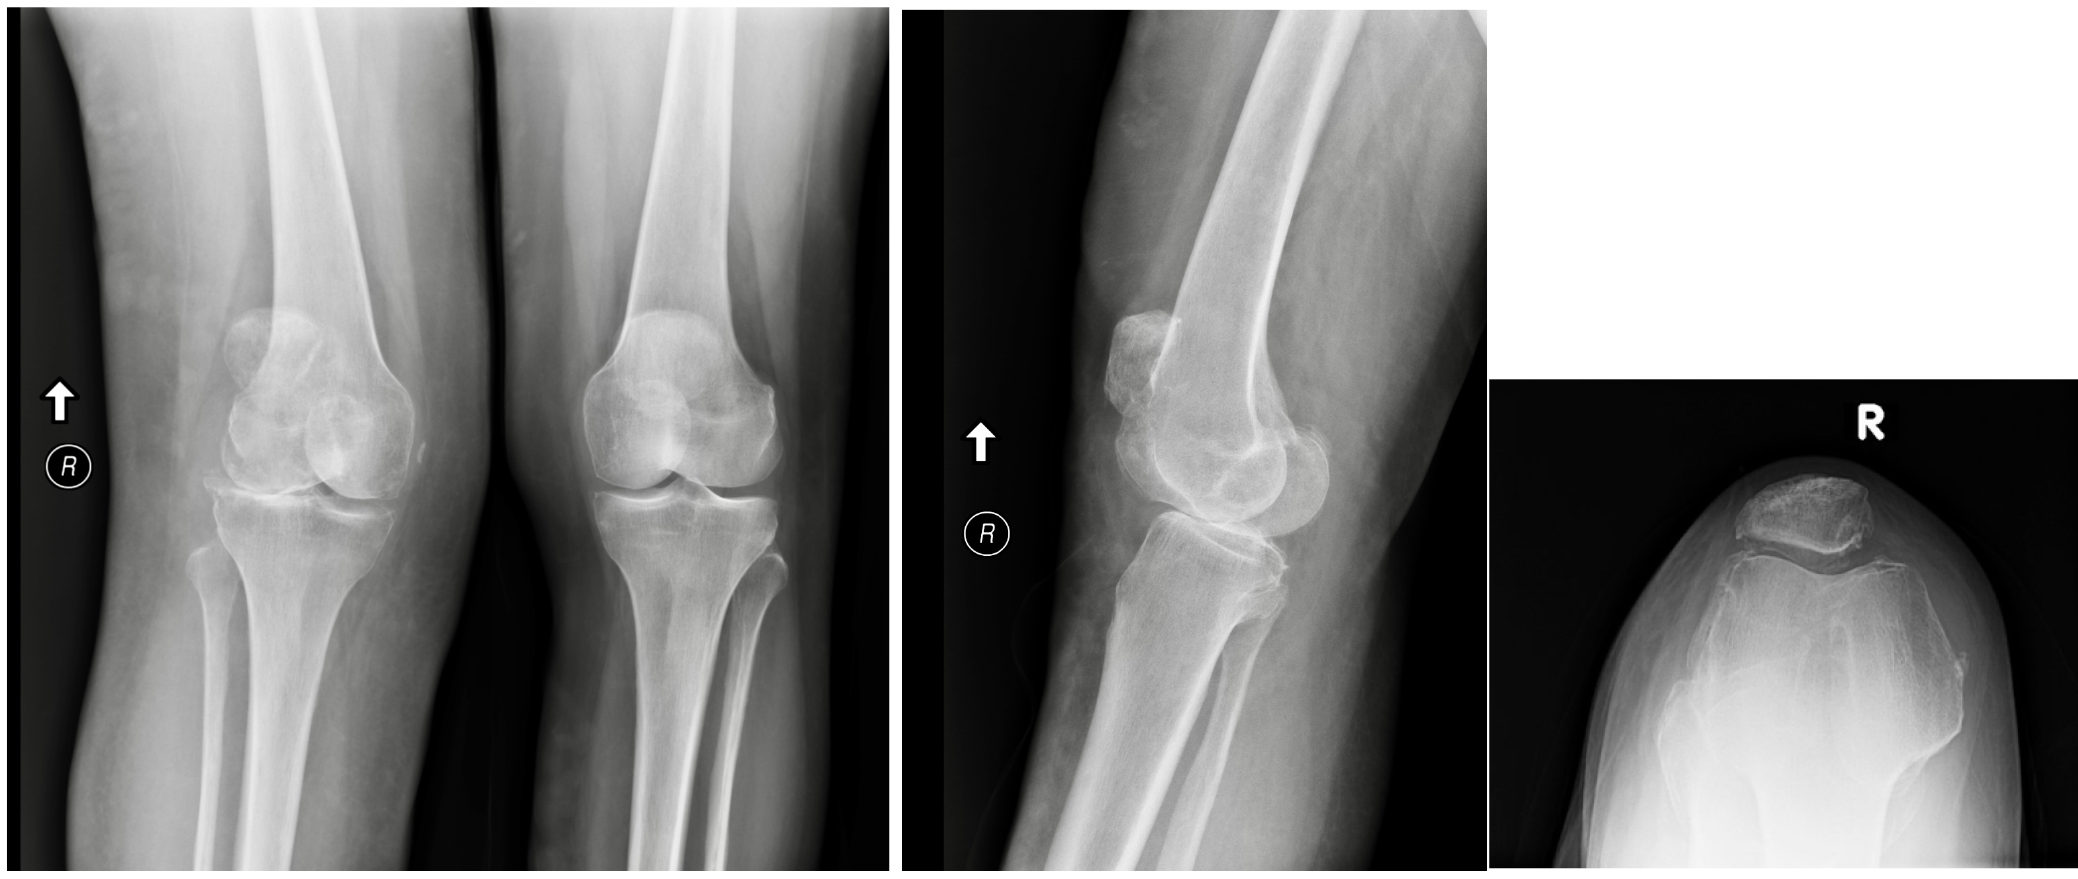 Preoperative long-leg alignment and sample X-rays